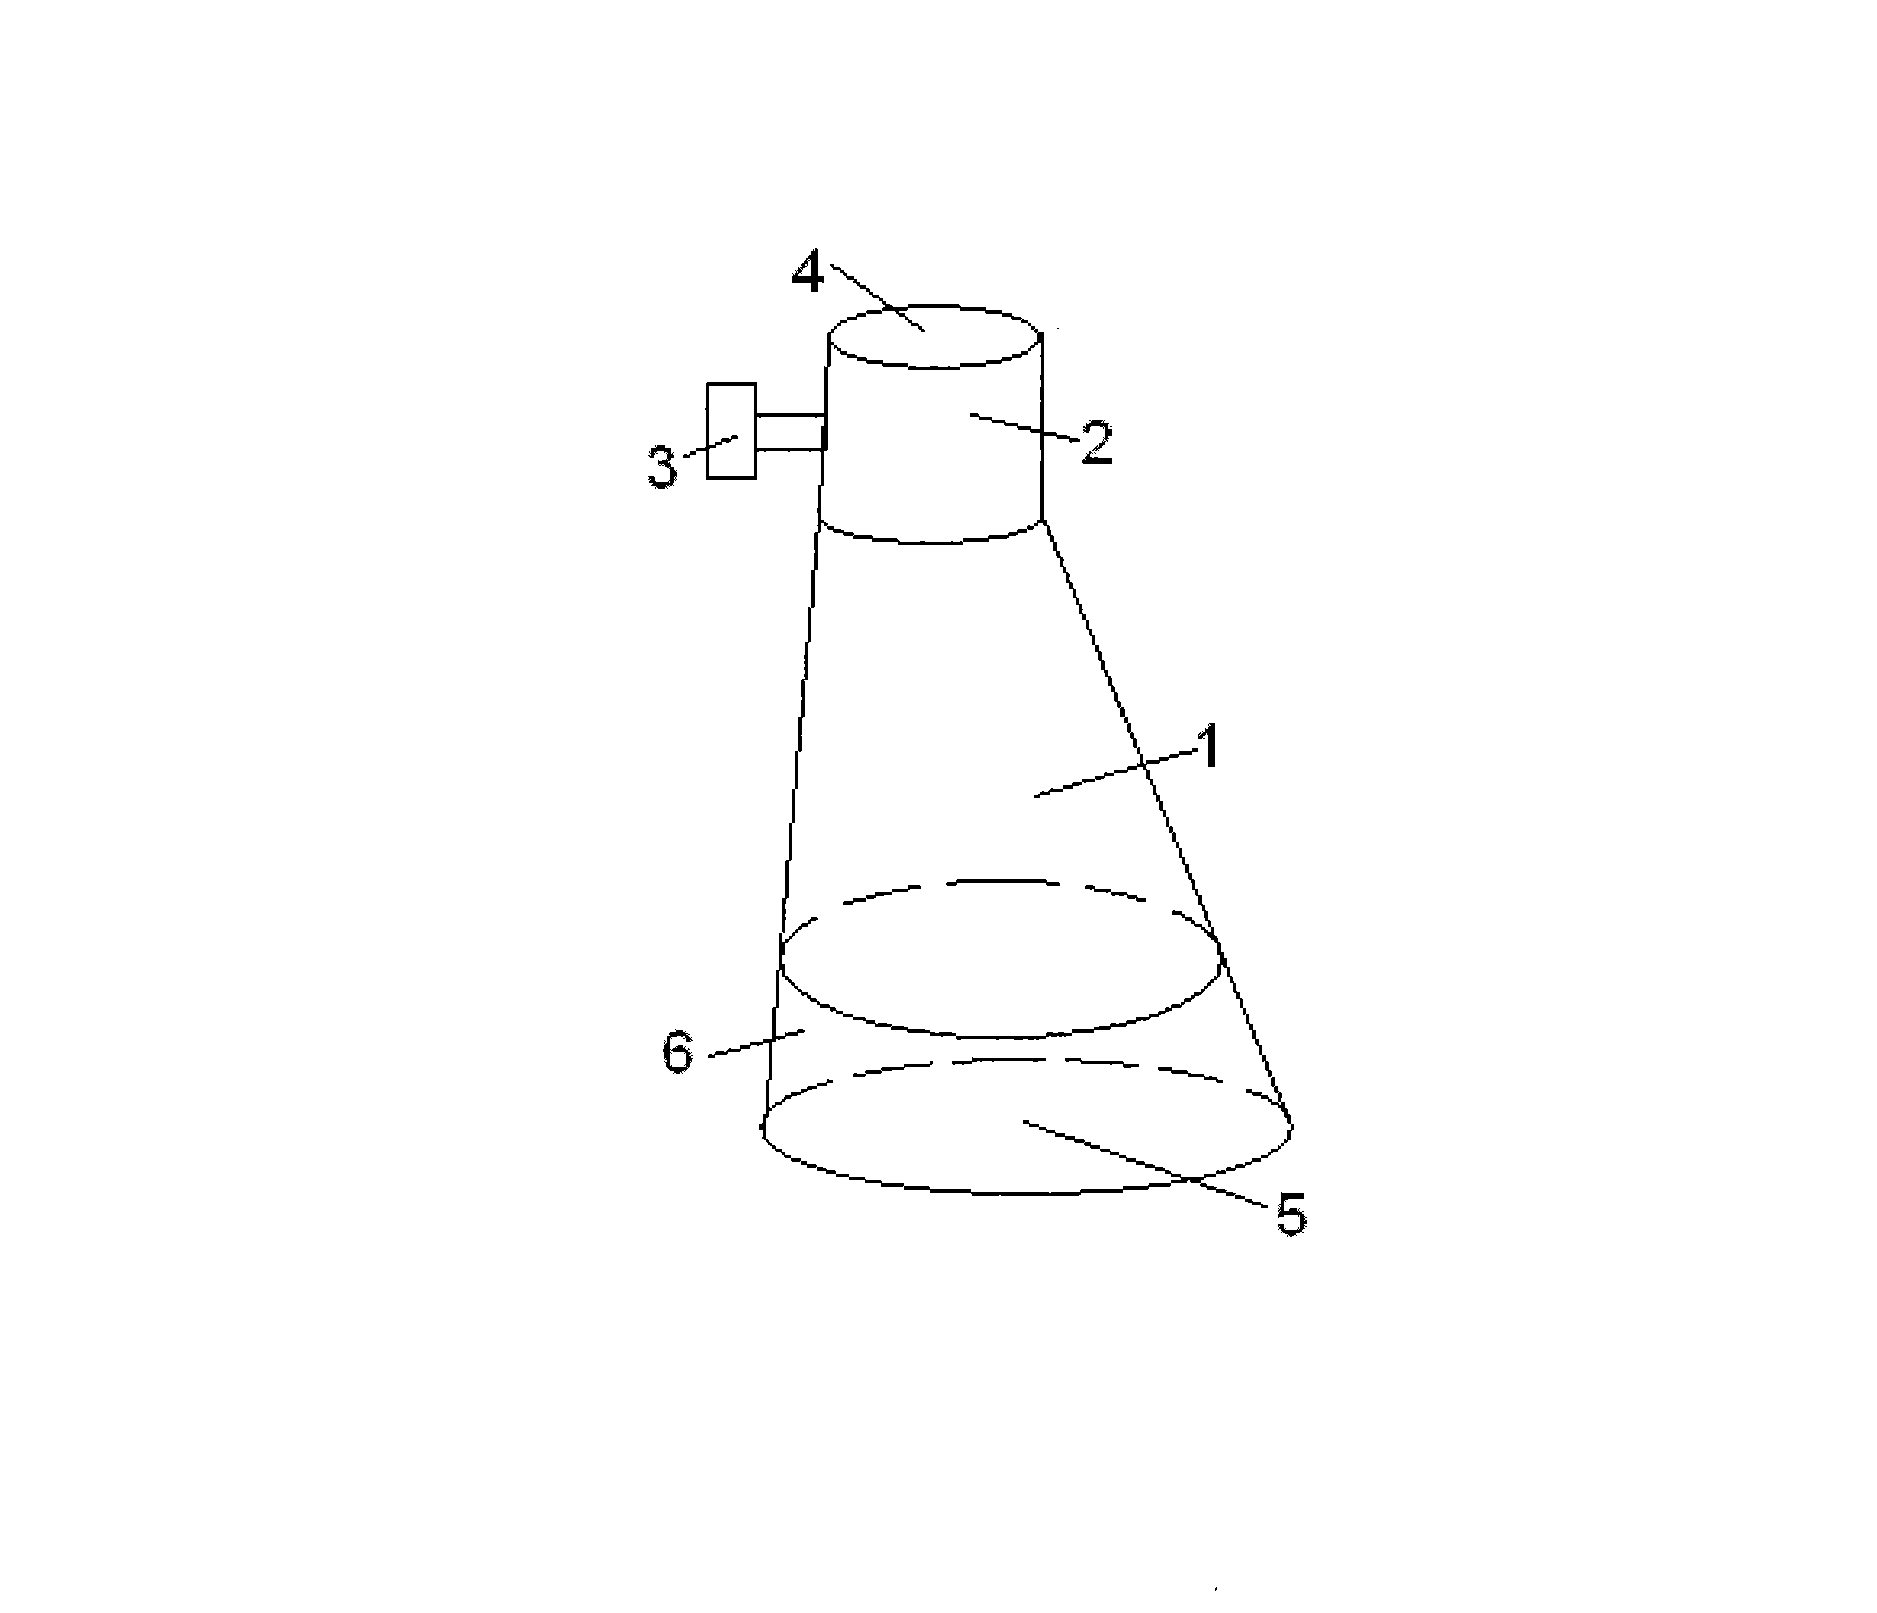 Appliance for relieving tachypnea of infant